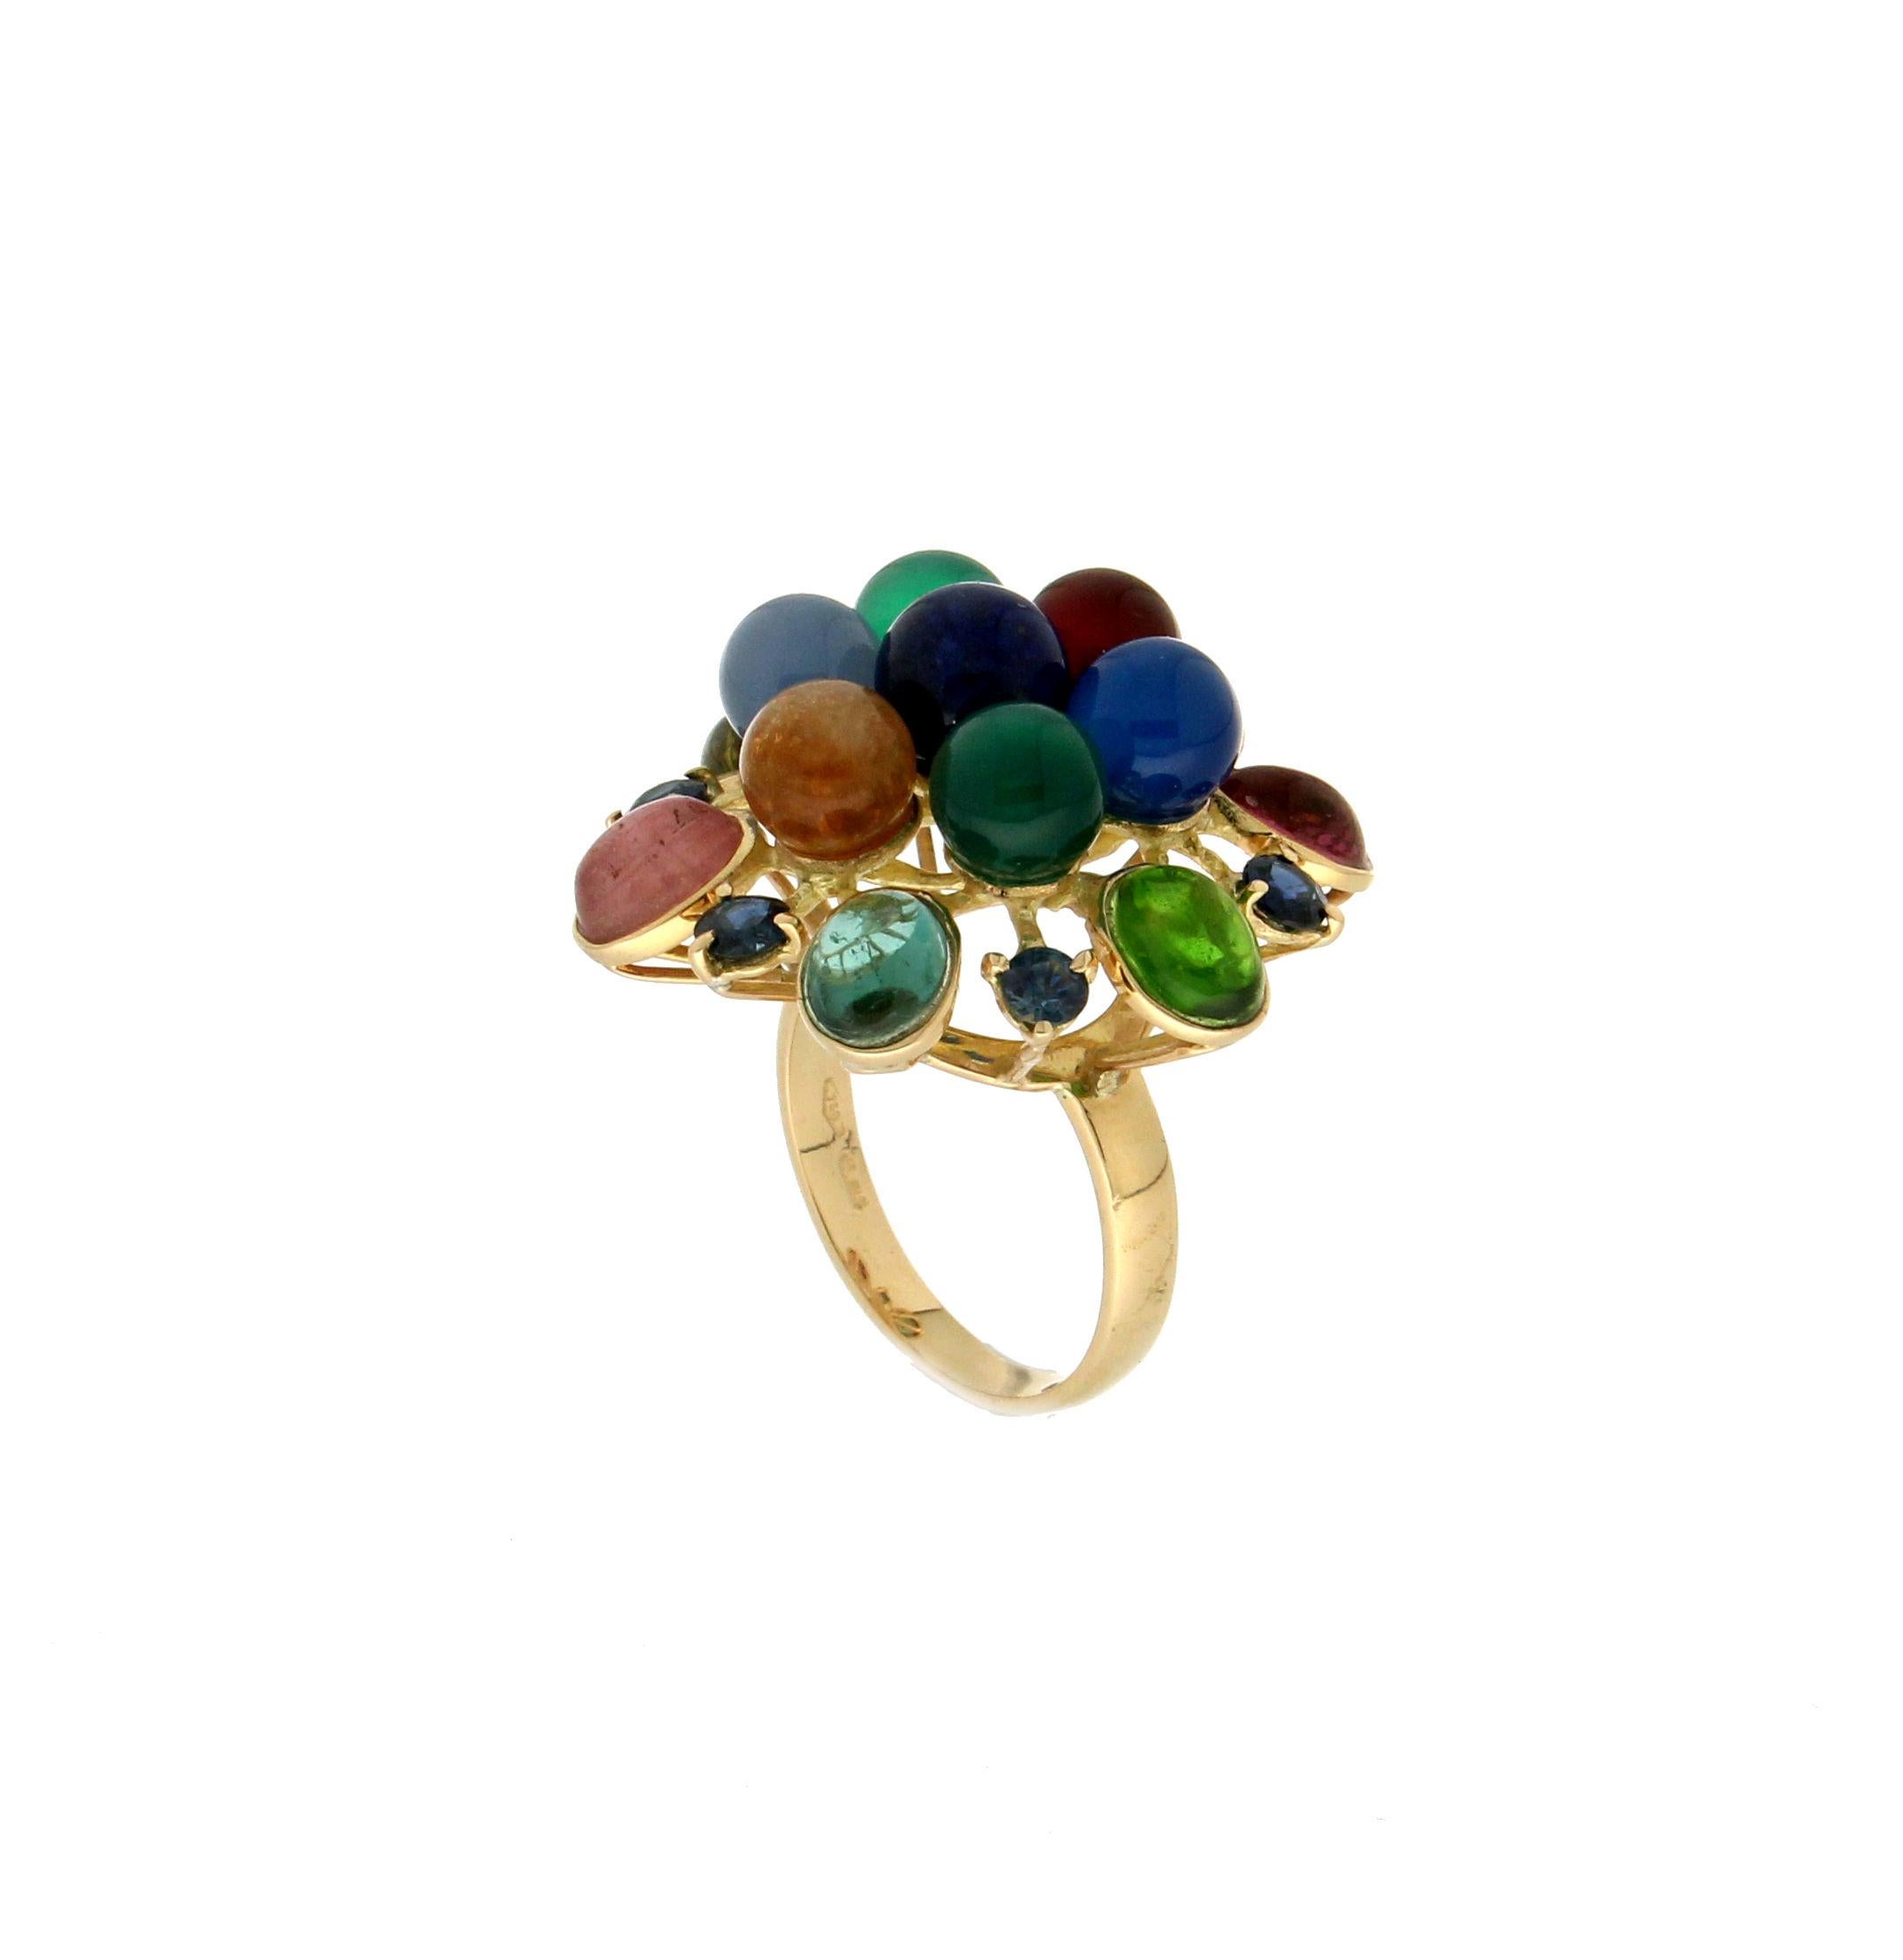 18 karat yellow gold cocktail ring. Handmade by our artisans assembled with sapphires and semiprecious stones

Sapphires weight 1.23 karat
Ring total weight 13.20 grams
Ring size 7.75 US 16 Ita
(all rings are can be resized)